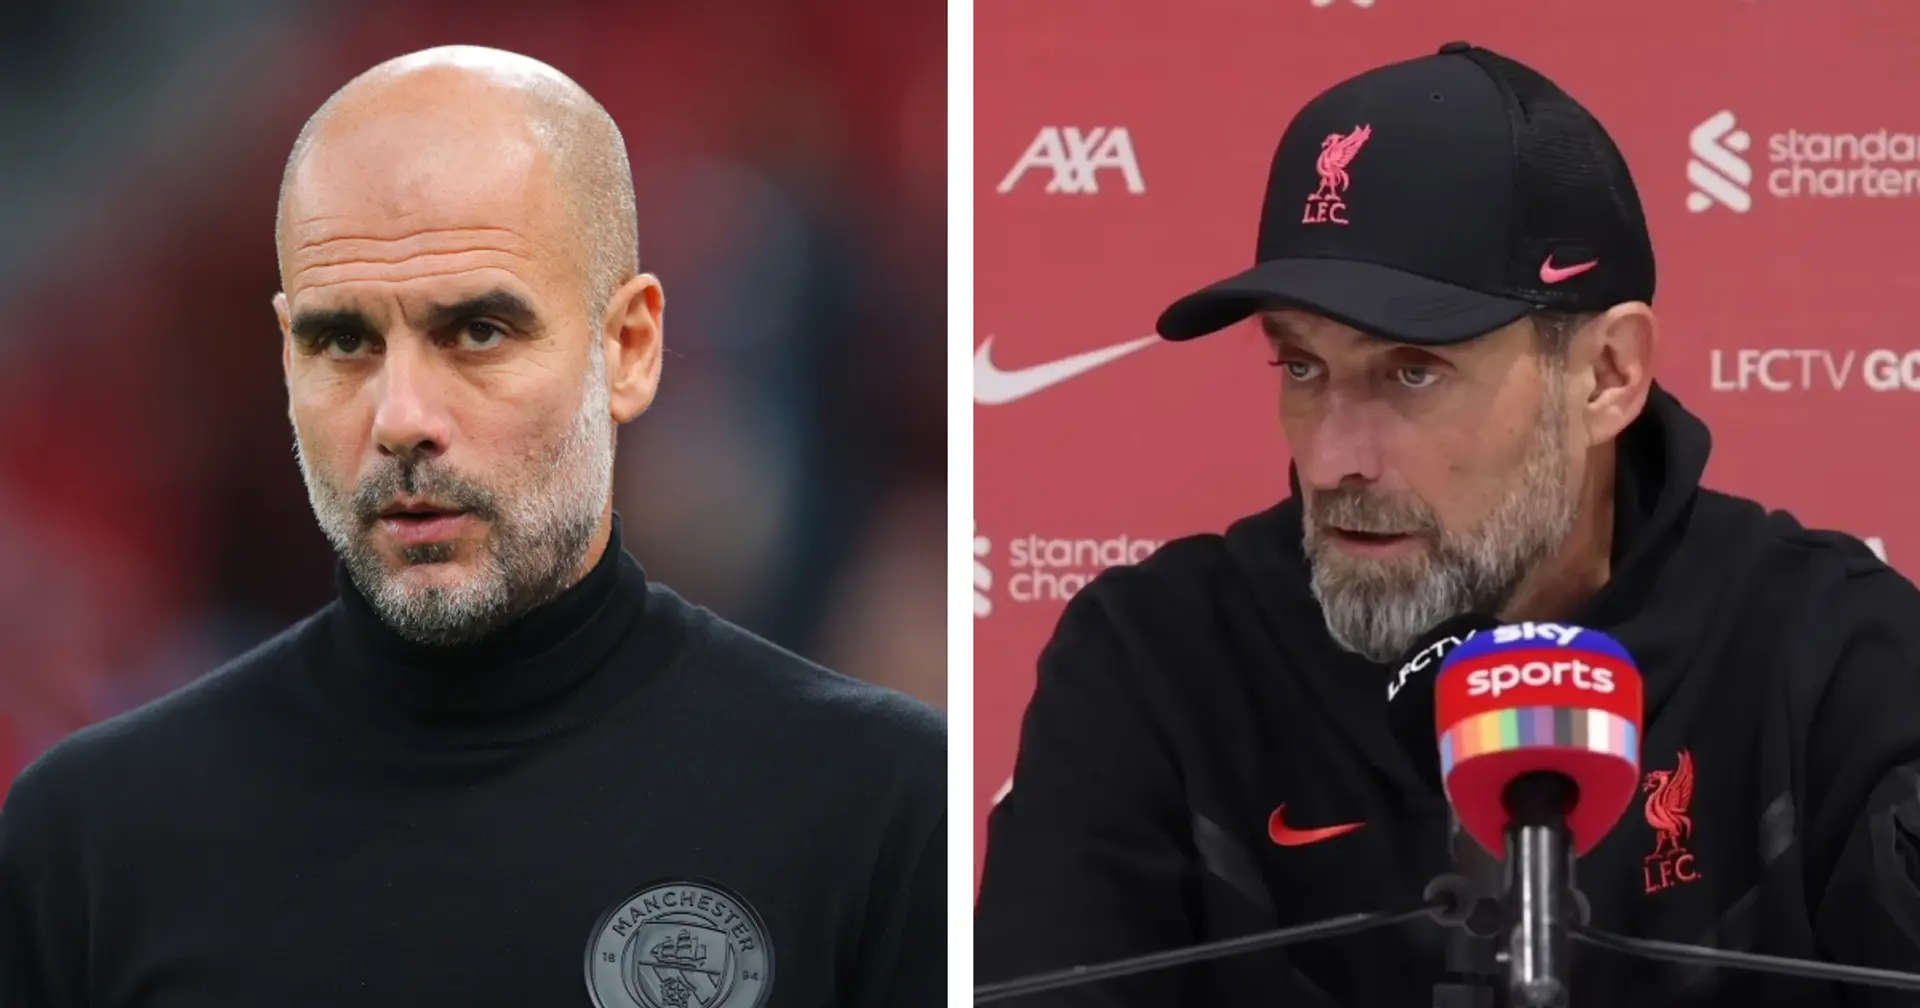 'We'll find a solution': Klopp makes selection hint as Liverpool face City just days after World Cup final